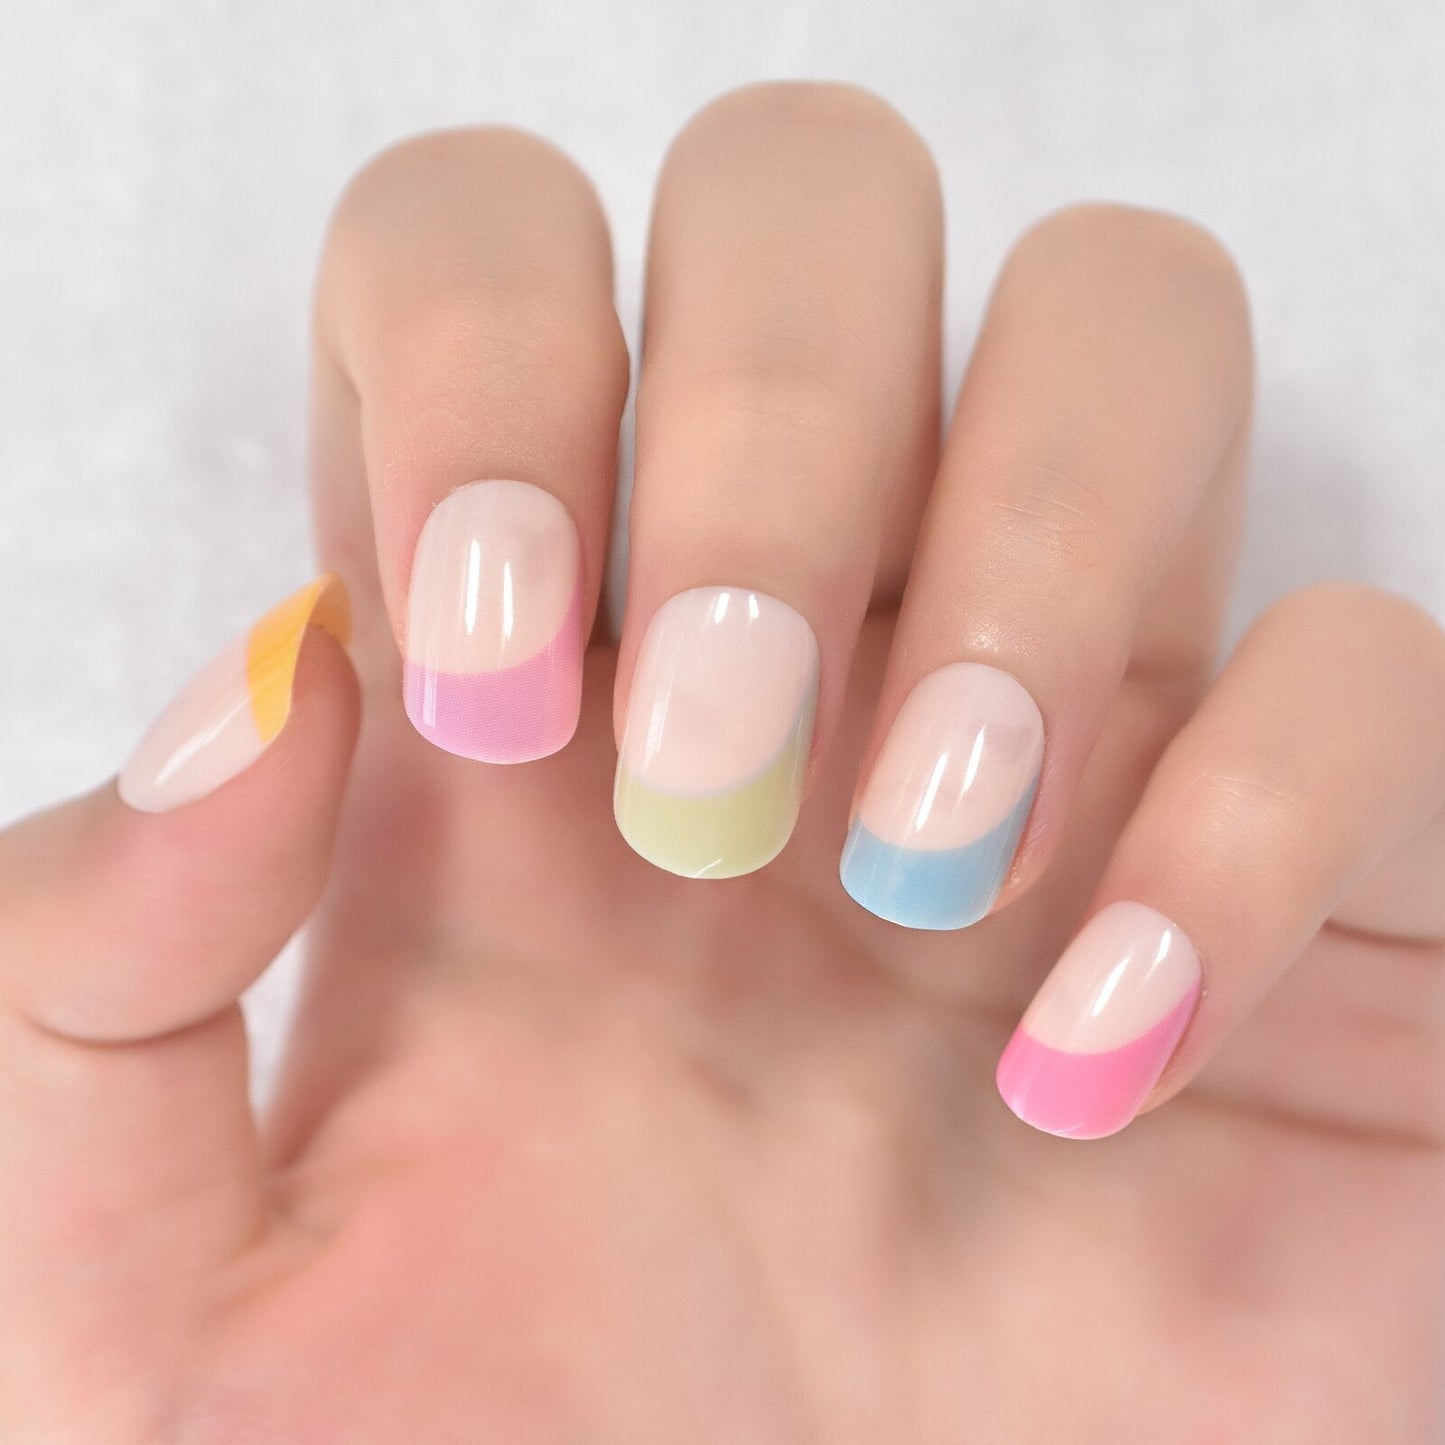 Glossy Gradient Rainbow Ombre French Press on Nails Almond Fake Nails Stiletto Oval Pointed Manicure False Nails Finger Tips